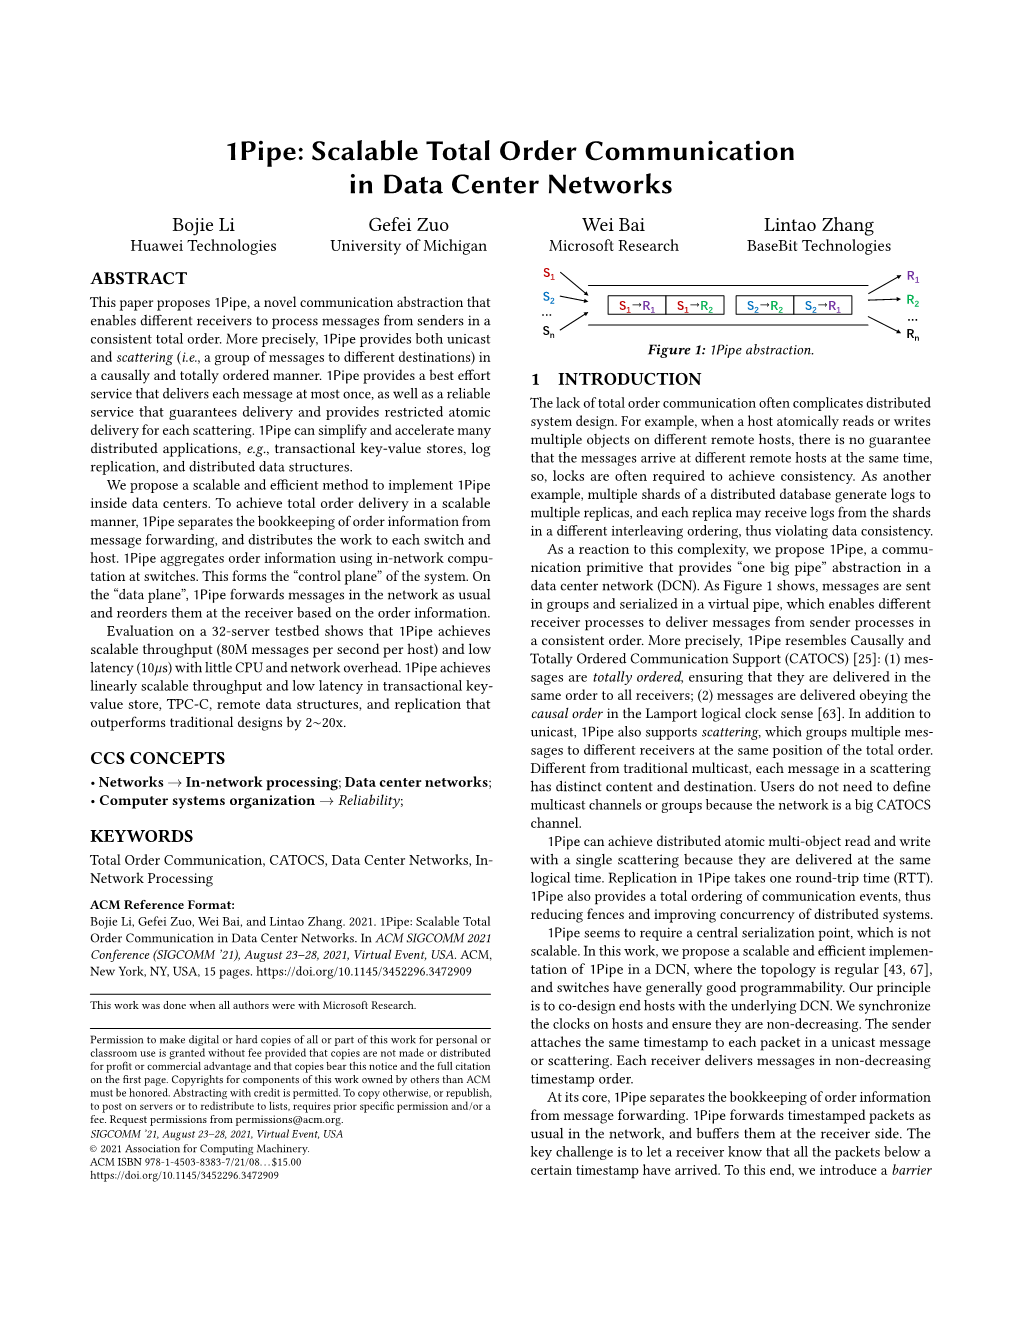 1Pipe: Scalable Total Order Communication in Data Center Networks